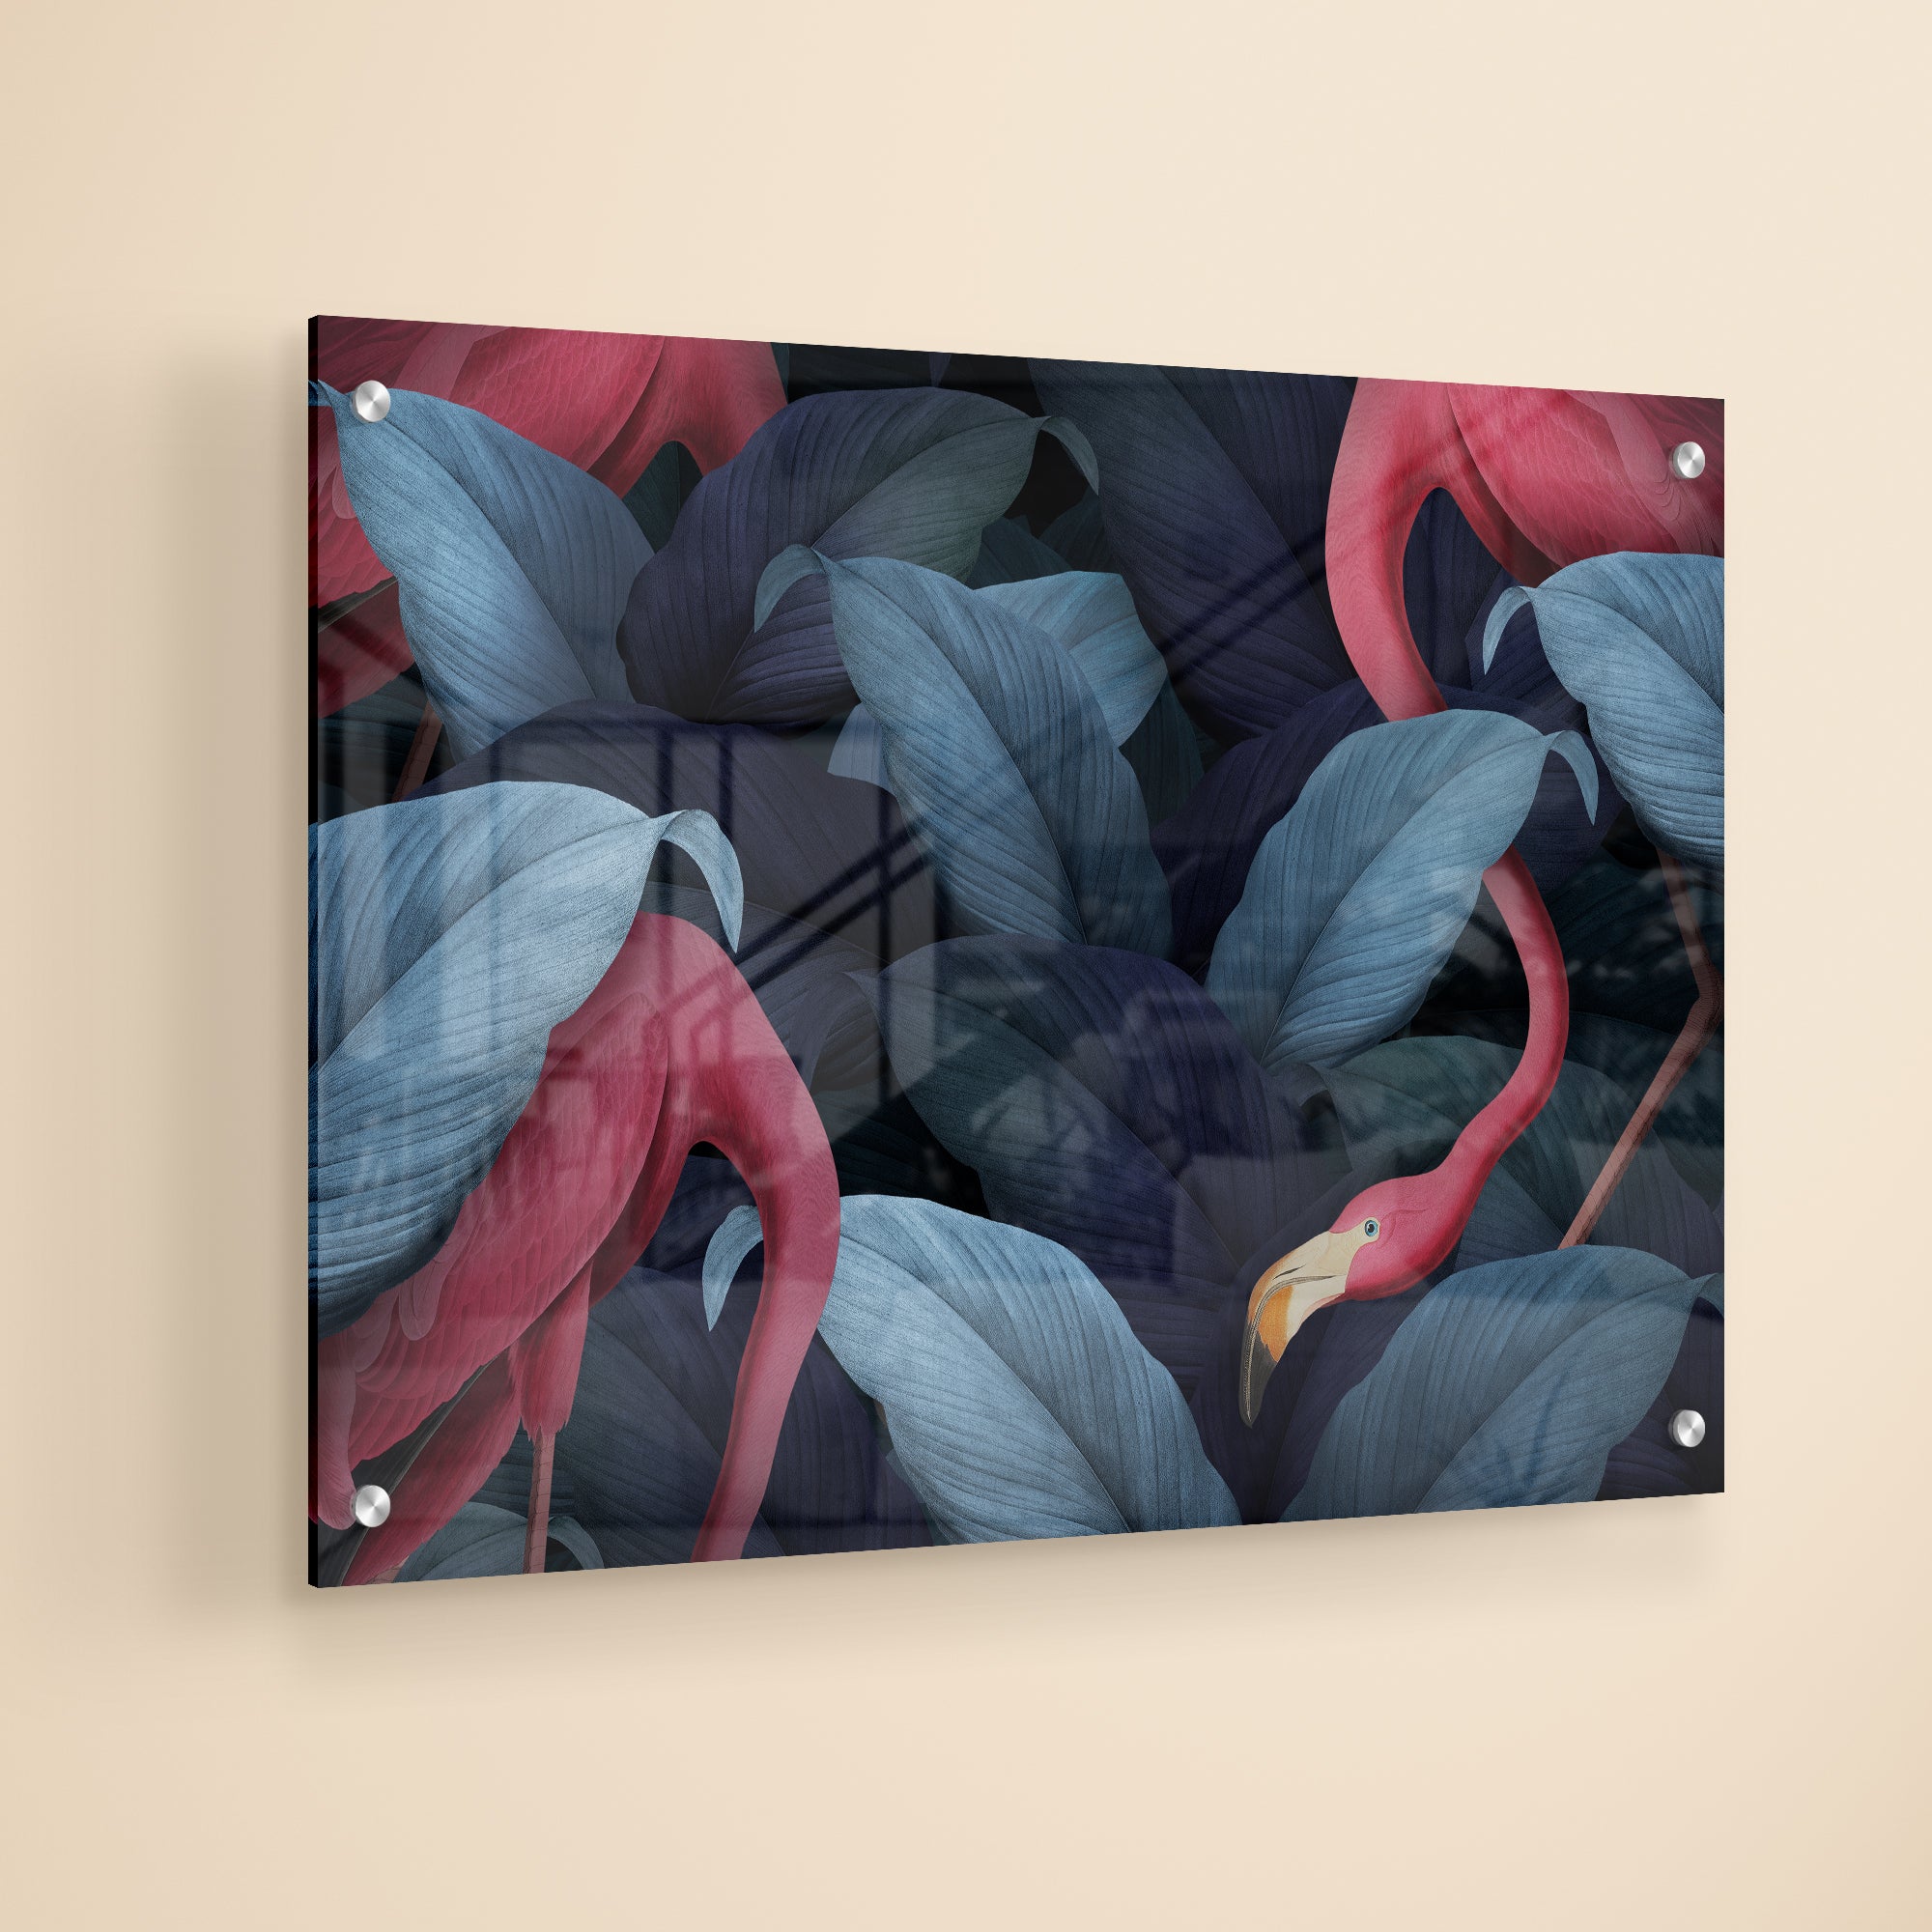 Flamingo With Navy Blue Leaves Acrylic Painting